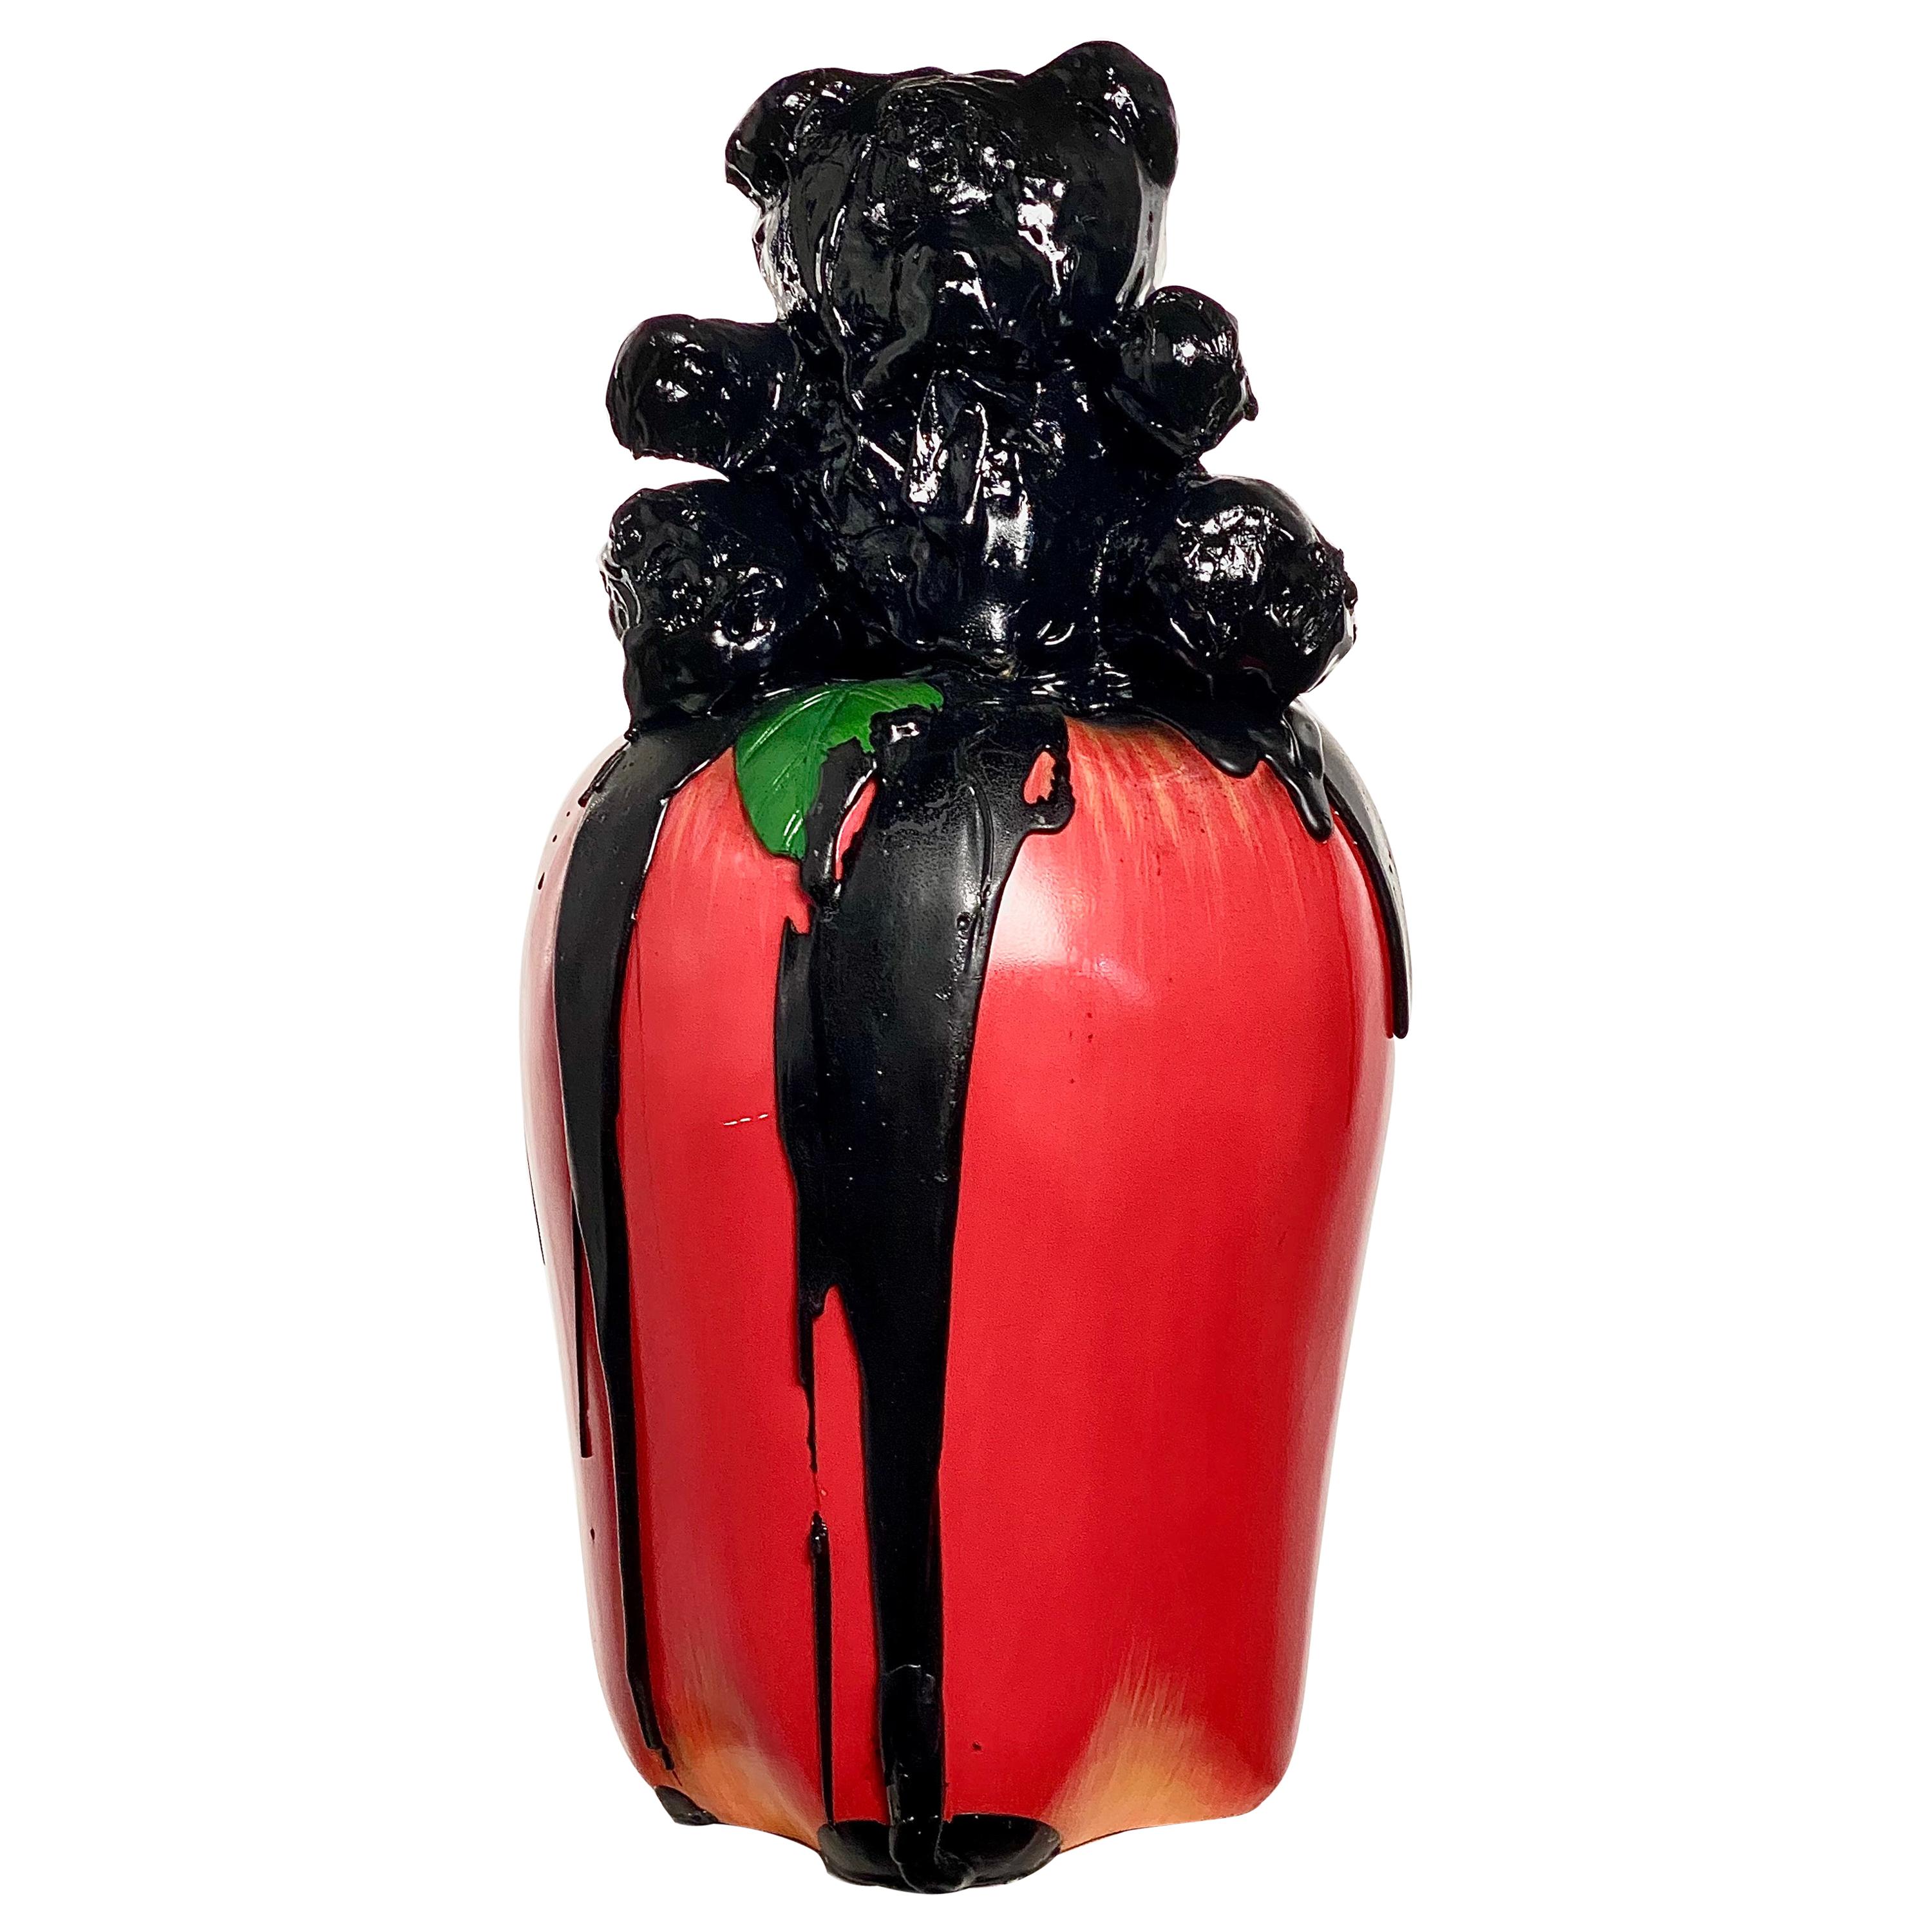 Black TAR Teddy and Red Apple Sculpture, 21st Century by Mattia Biagi For Sale